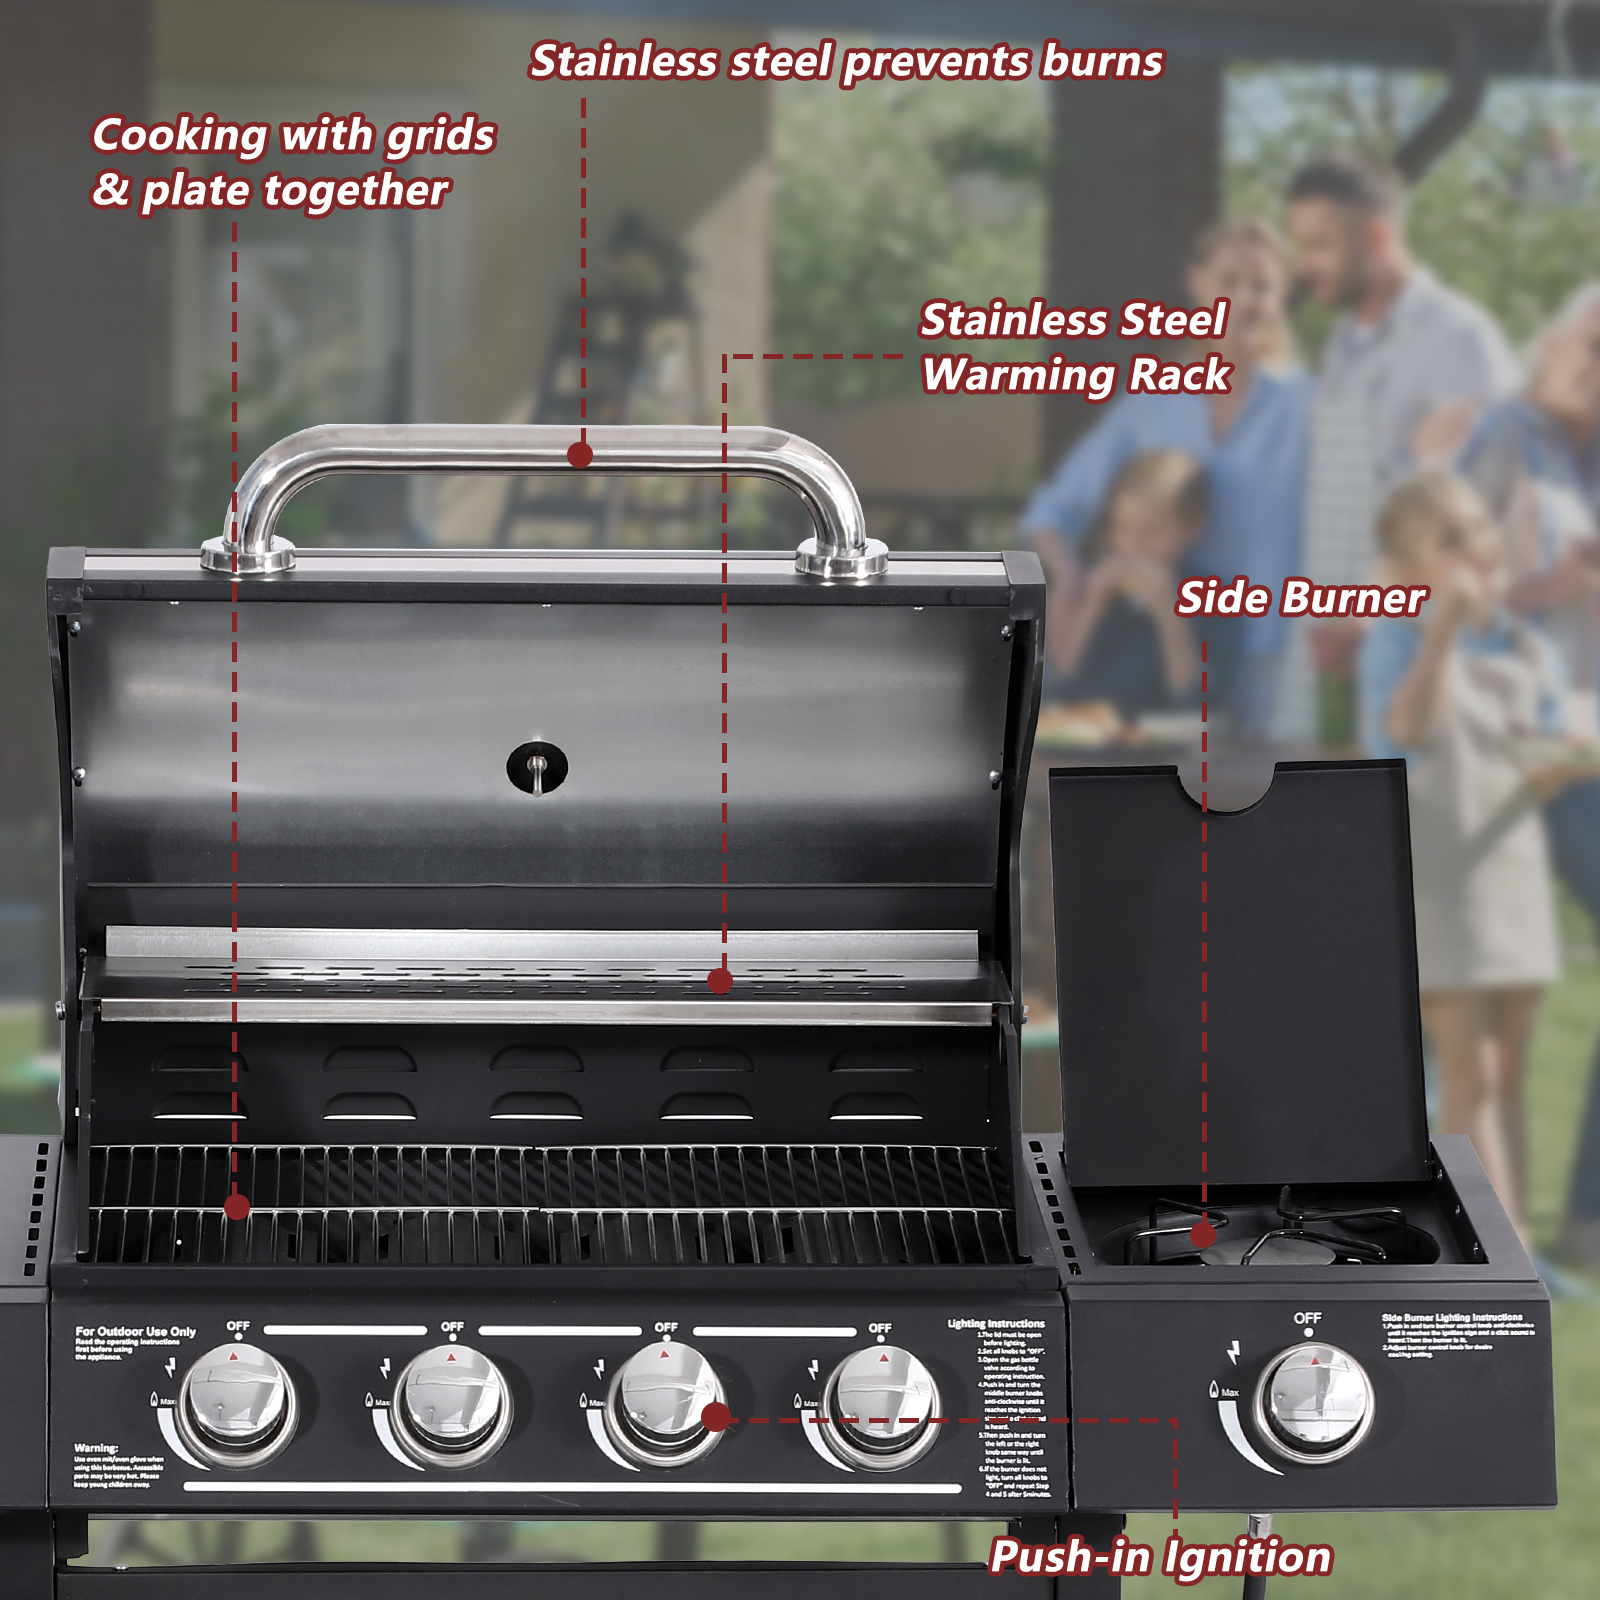 Haverchair 4-Burner Propane Gas Grill with Side Burner and Stainless Steel Grates 50,000 BTU Outdoor Cooking BBQ Grills Cart,Black - image 4 of 9